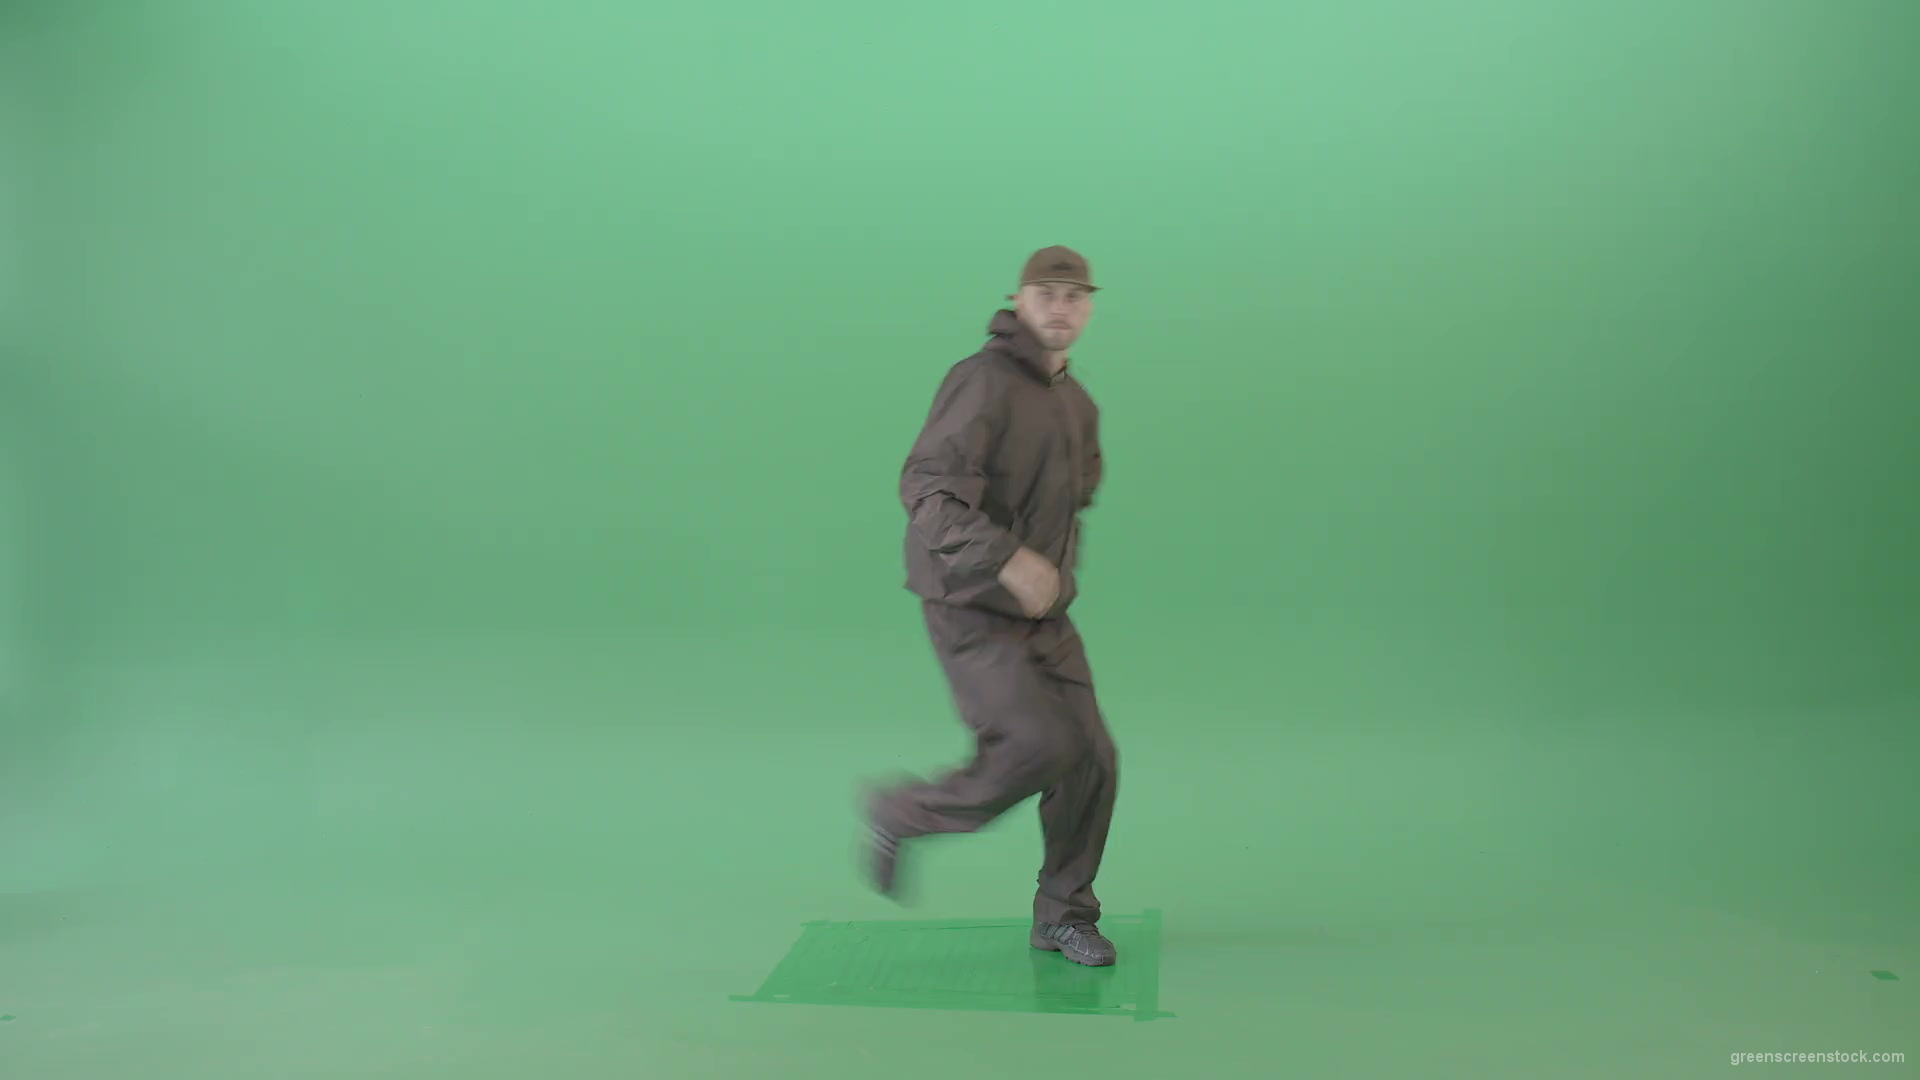 Breakadance-Man-making-dynamic-power-move-element-spinning-on-hand-over-green-screen-4K-Video-Footage-1920_001 Green Screen Stock